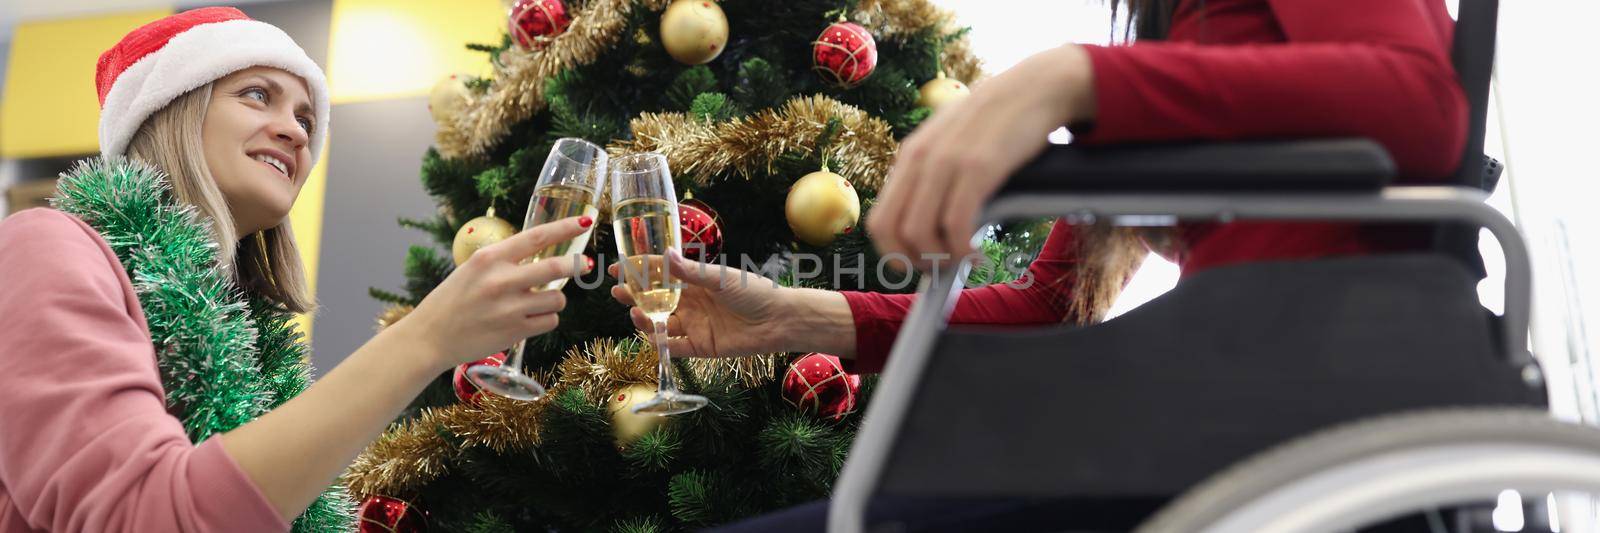 Sisters clink with glasses filled with champagne in cozy home atmosphere by kuprevich